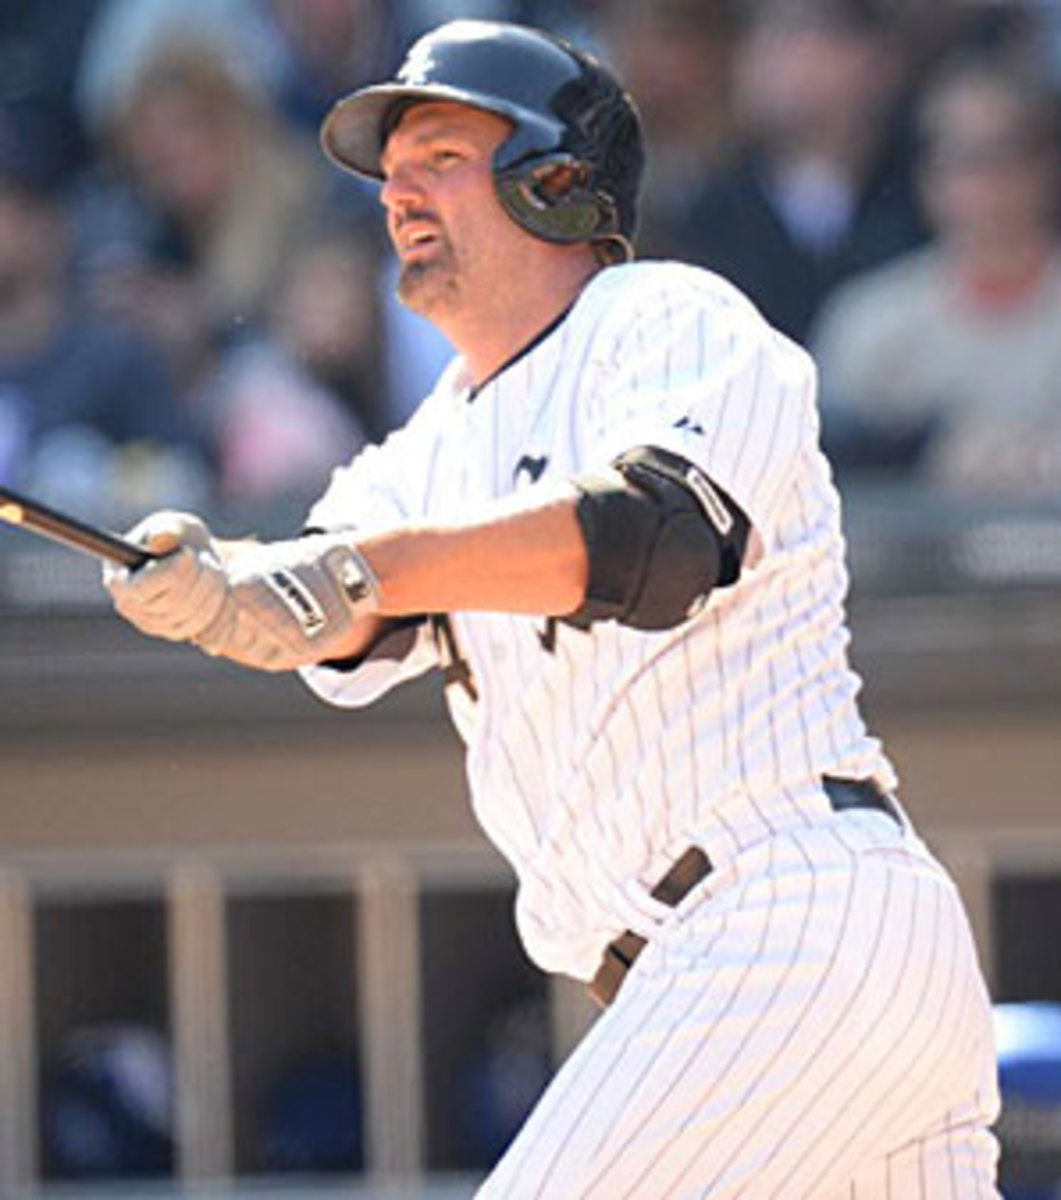 Paul Konerko has played all but 81 of his 2,187 career games with the White Sox.